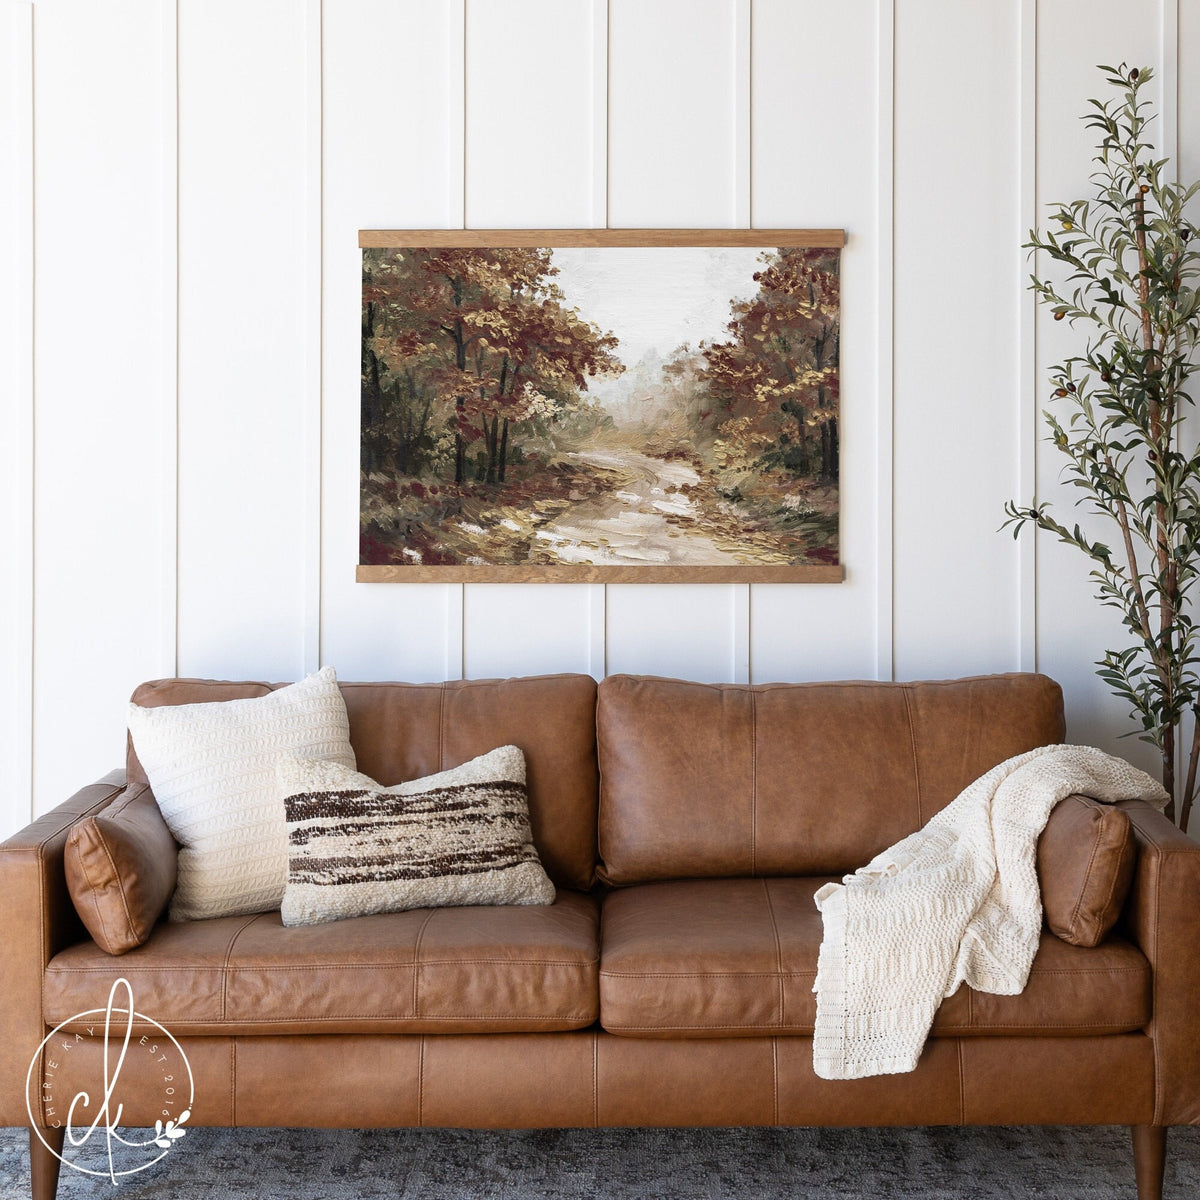 Autumn Trees Painting | Fall Wall Decor | Canvas Tapestry | Fabric Wall Hanging | Living Room Wall Decor | Autumn Wall Art